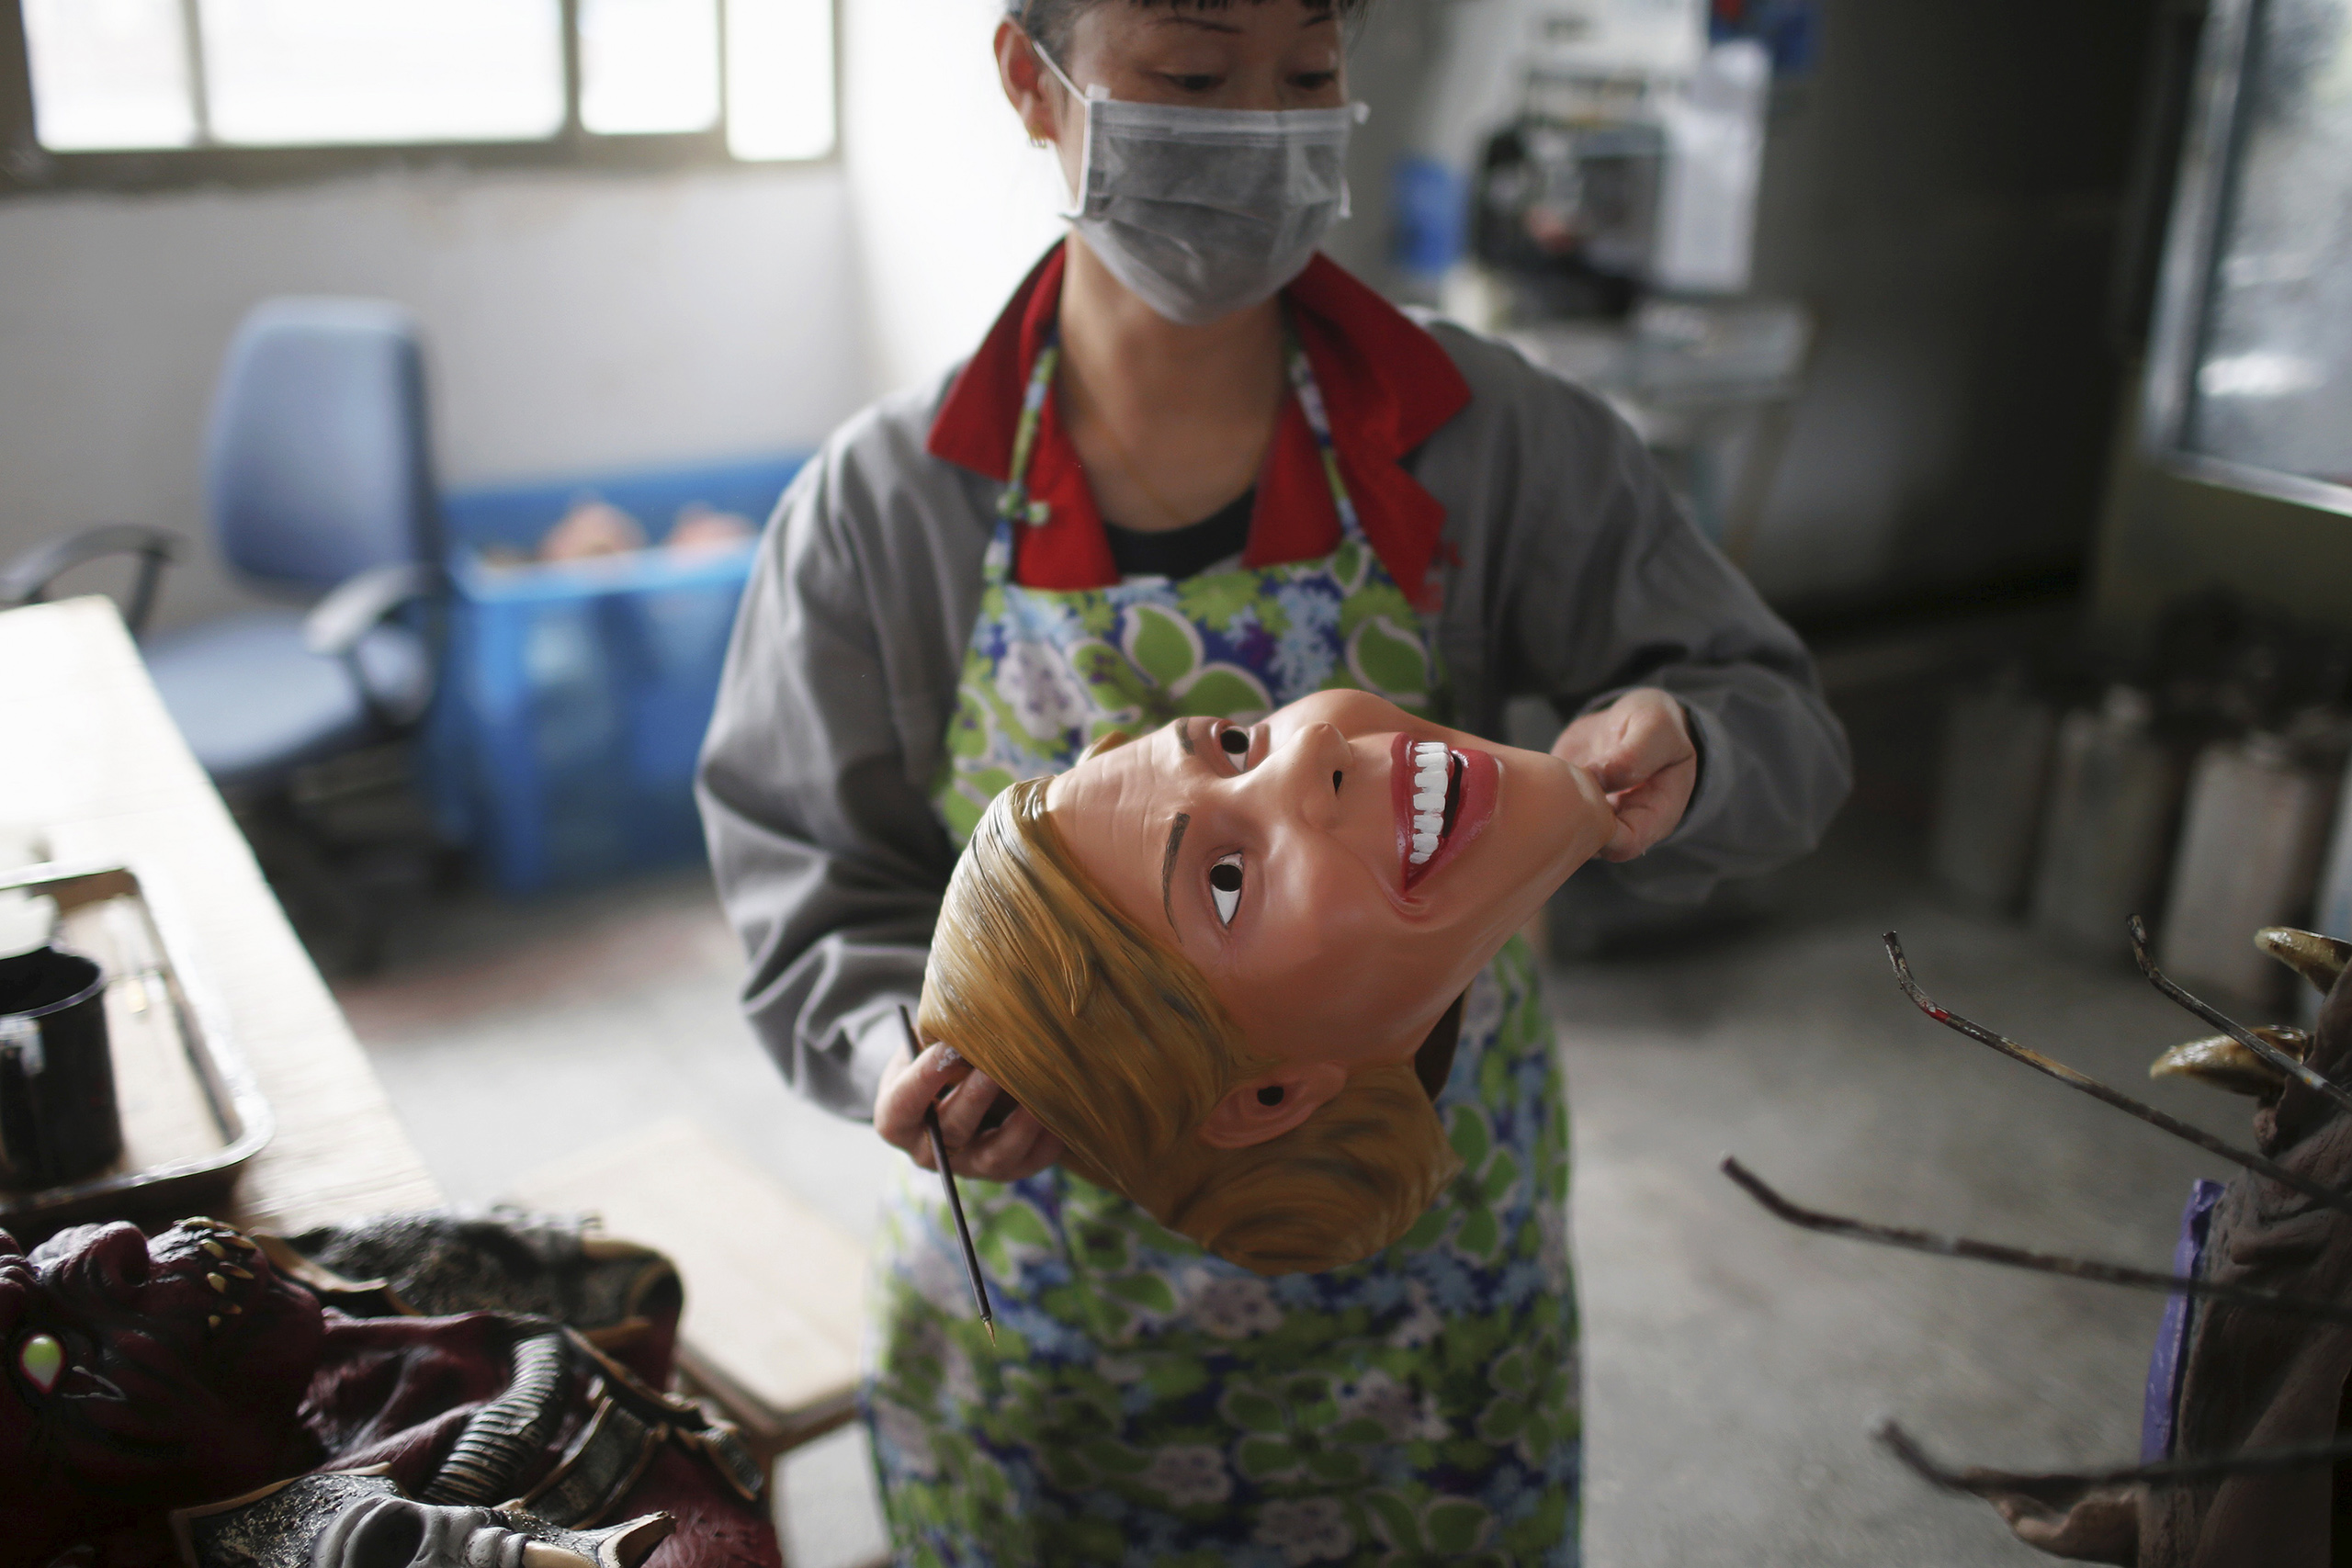 A worker checks a mask of Democratic presidential candidate Hillary Clinton, which was just painted, at Jinhua Partytime Latex Art and Crafts Factory in Jinhua, Zhejiang Province, China, May 25, 2016.